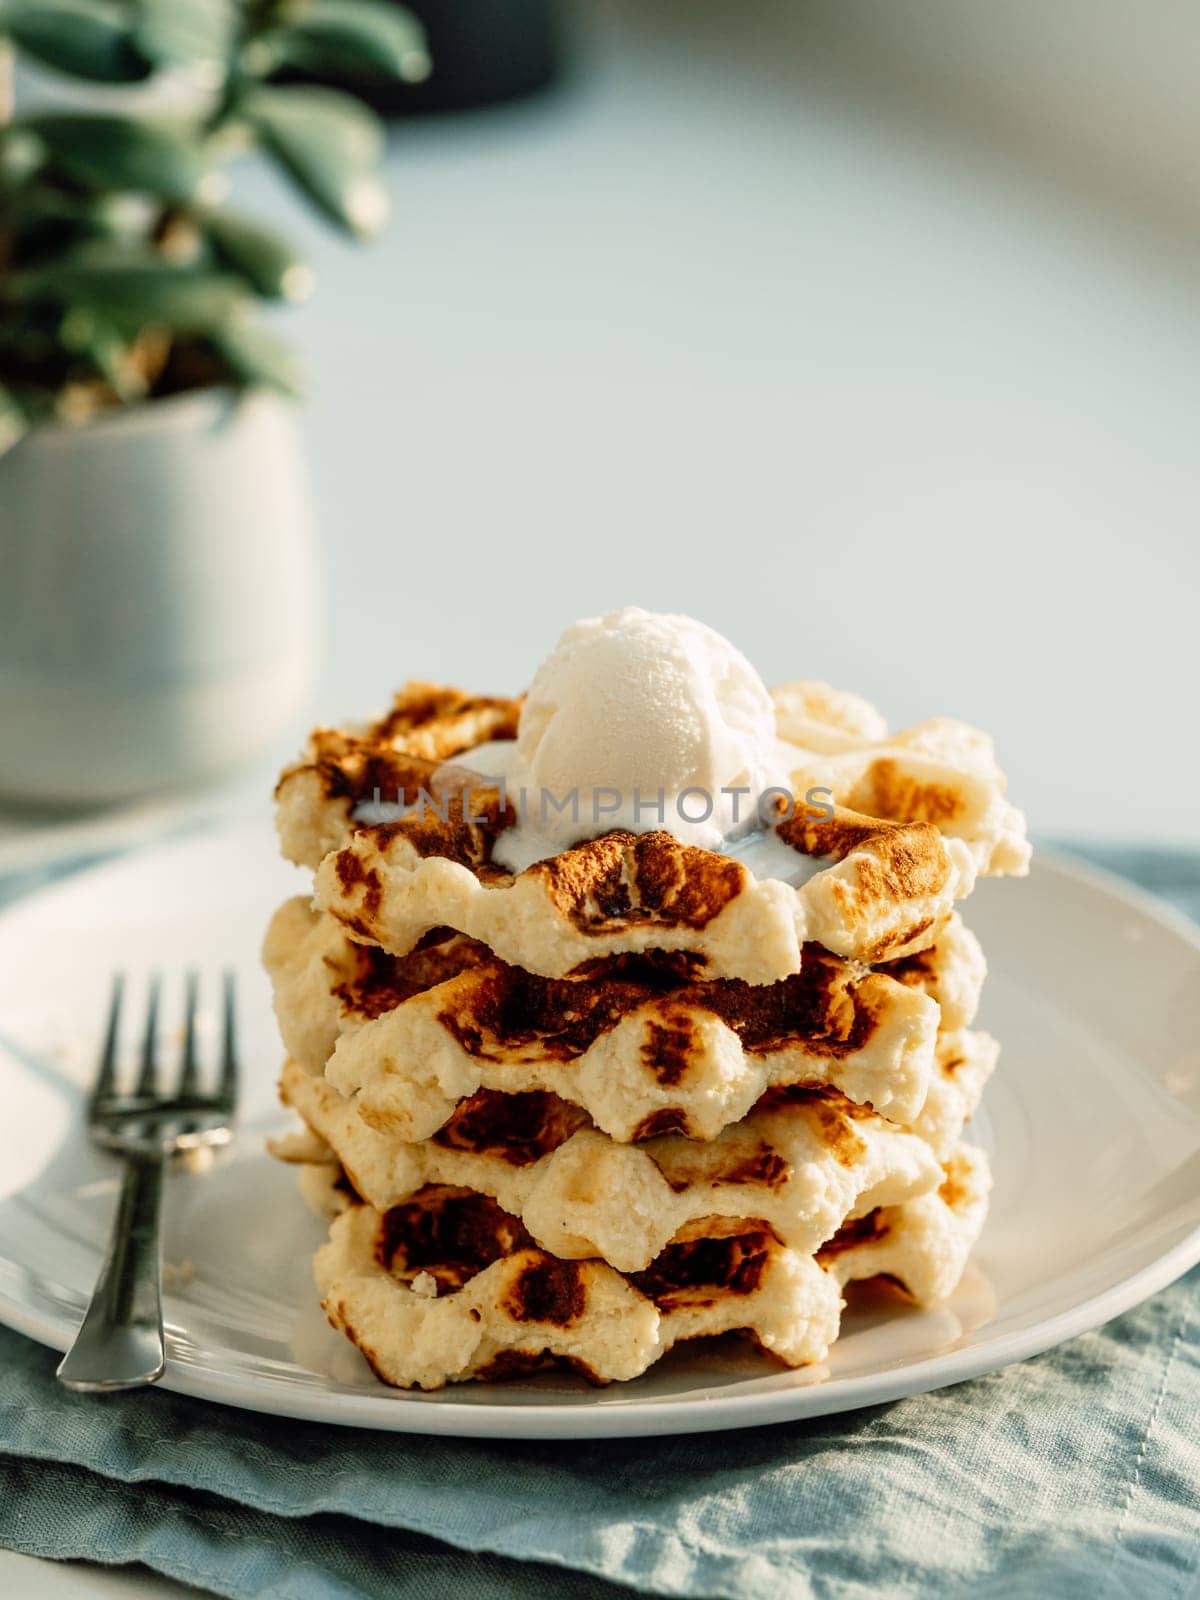 Ricotta cheese chaffles or waffles by fascinadora